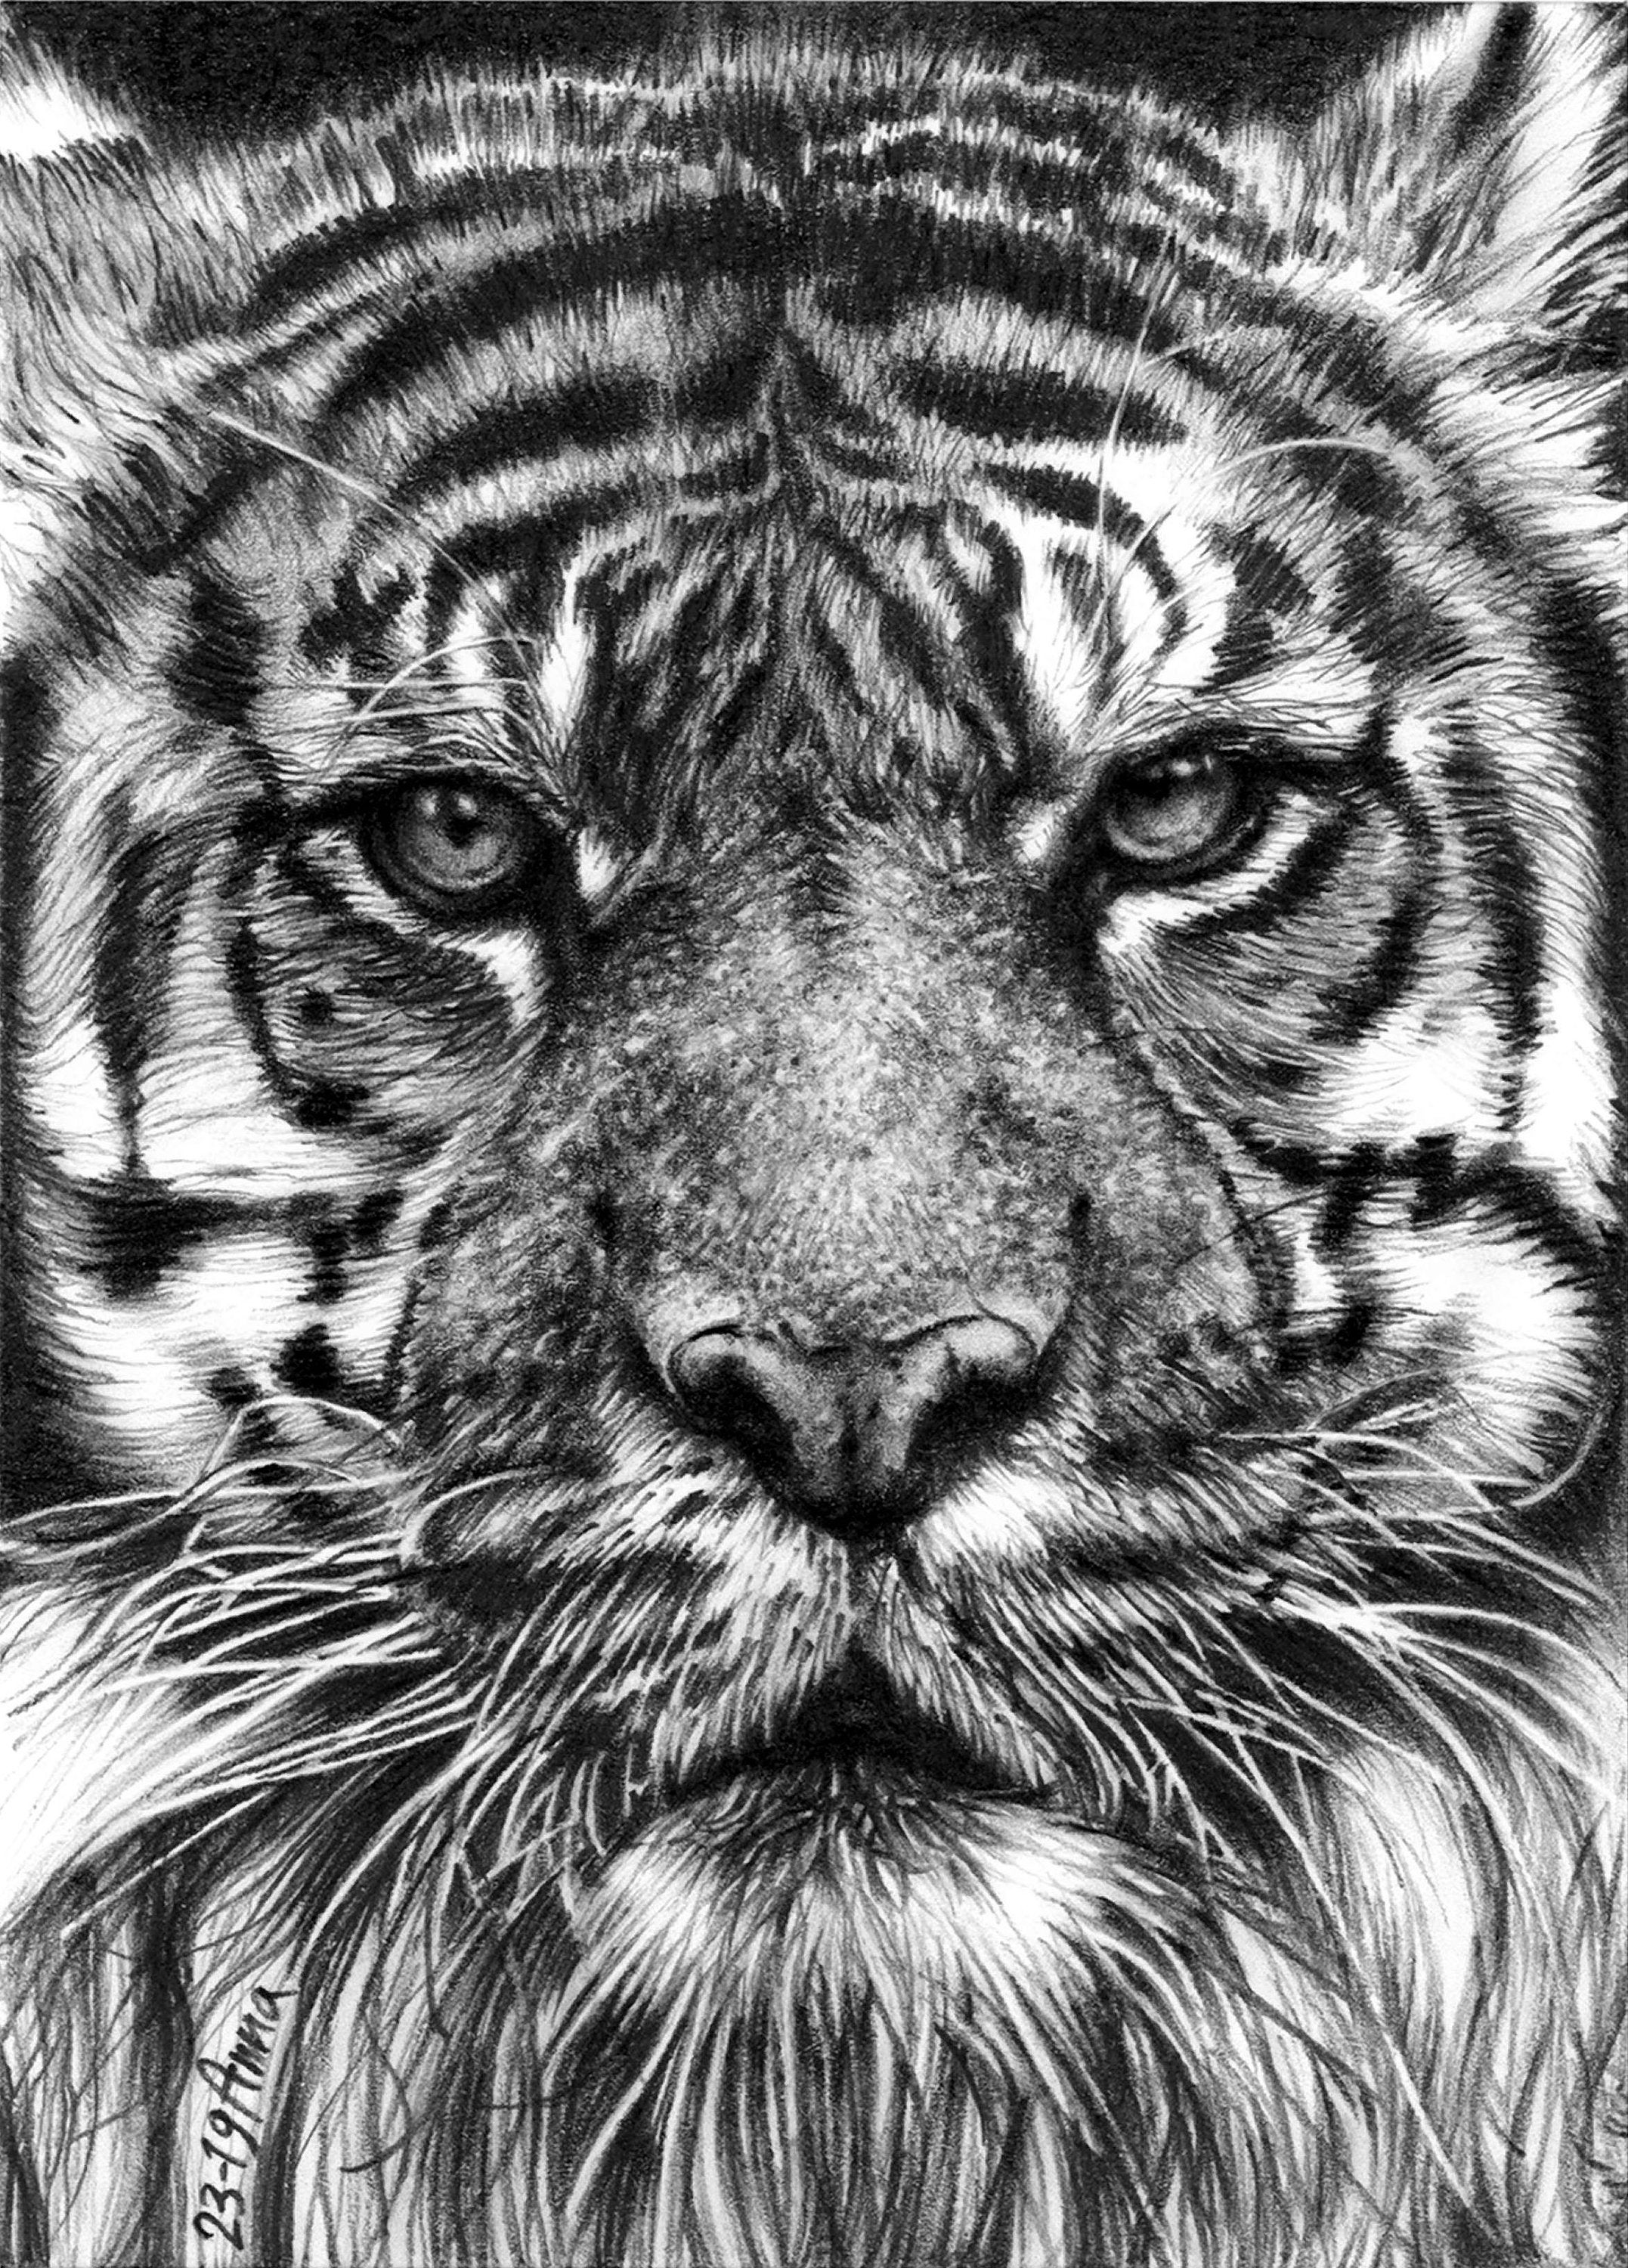 17 Spectacular Tutorials On How To Draw Animals - The Things to Draw Journey